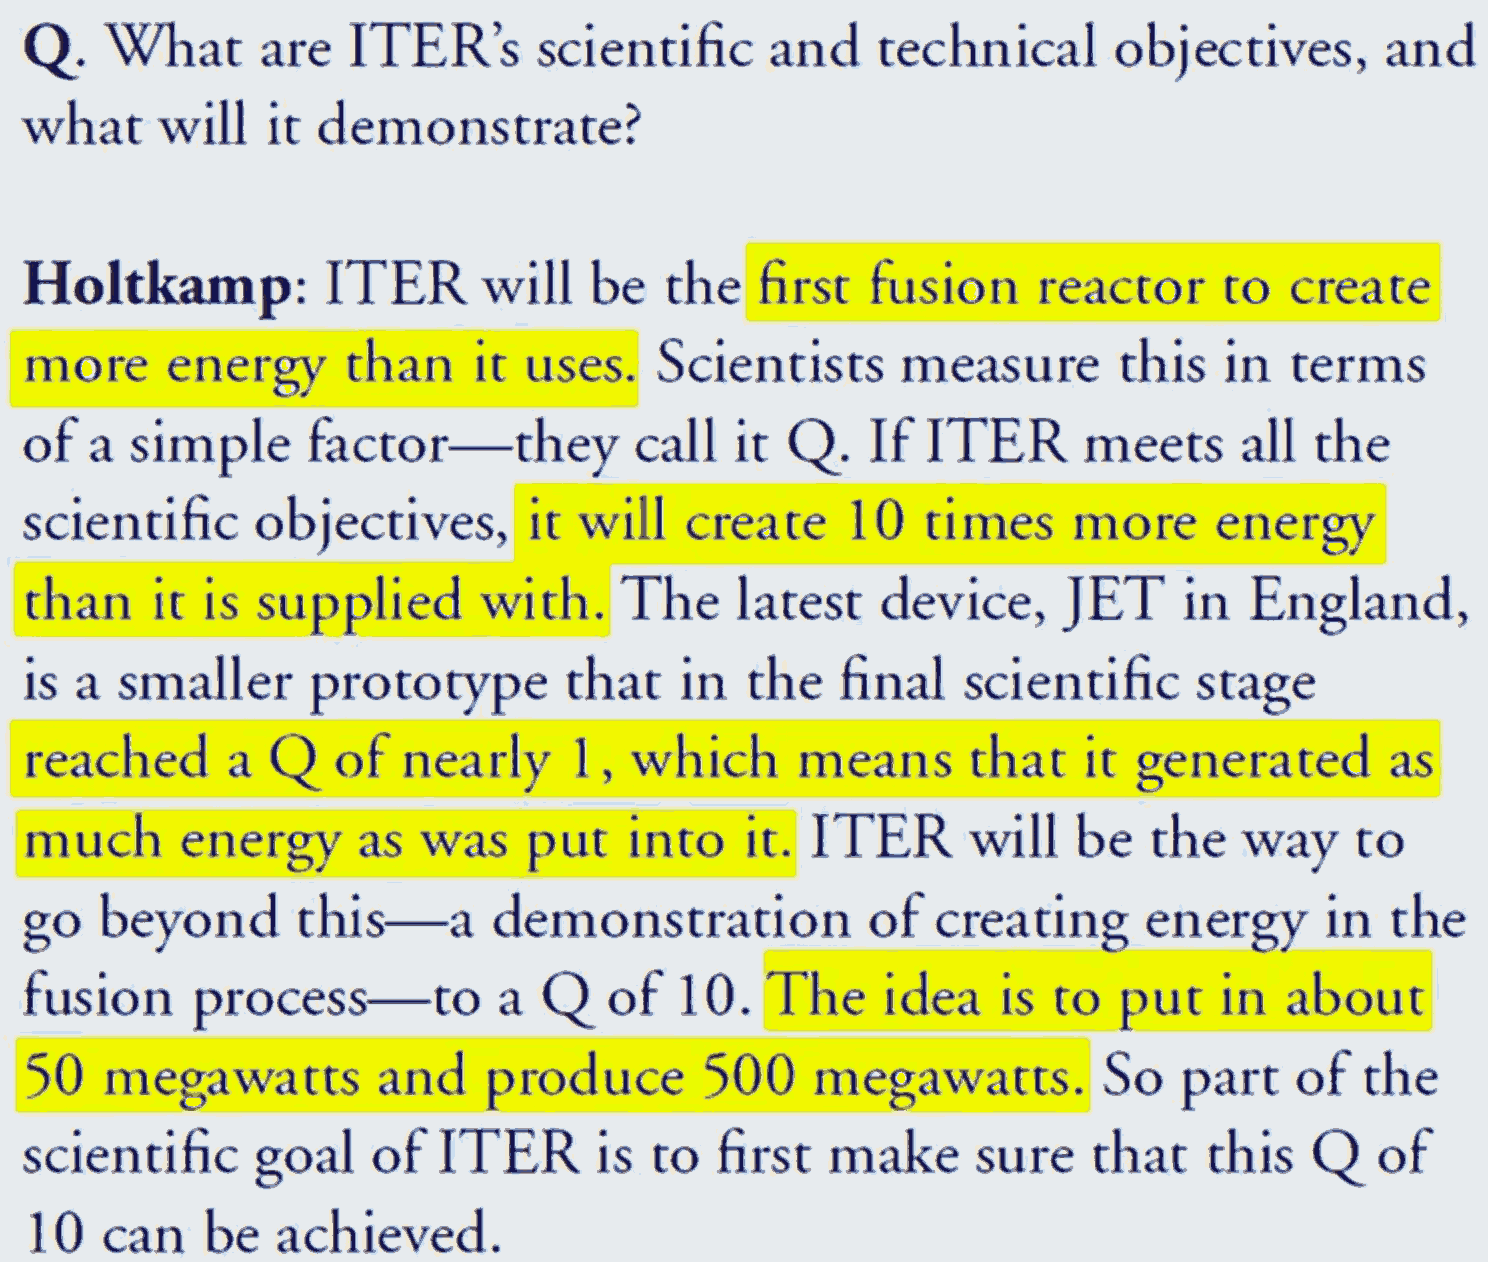 ITER project claims